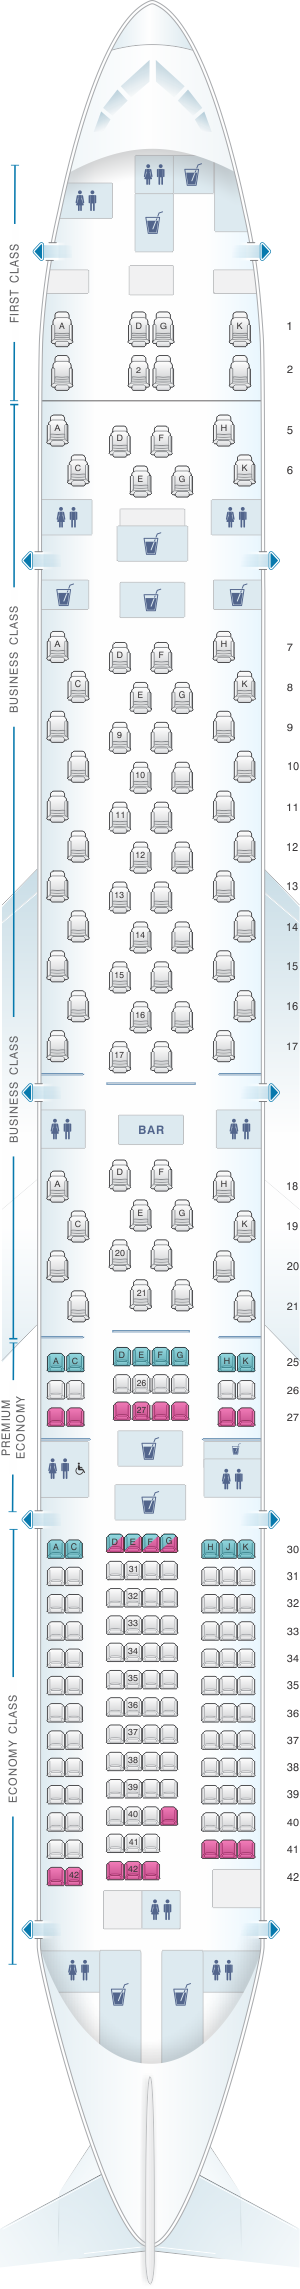 Seat map for ANA - All Nippon Airways Boeing B777 300ER 212pax